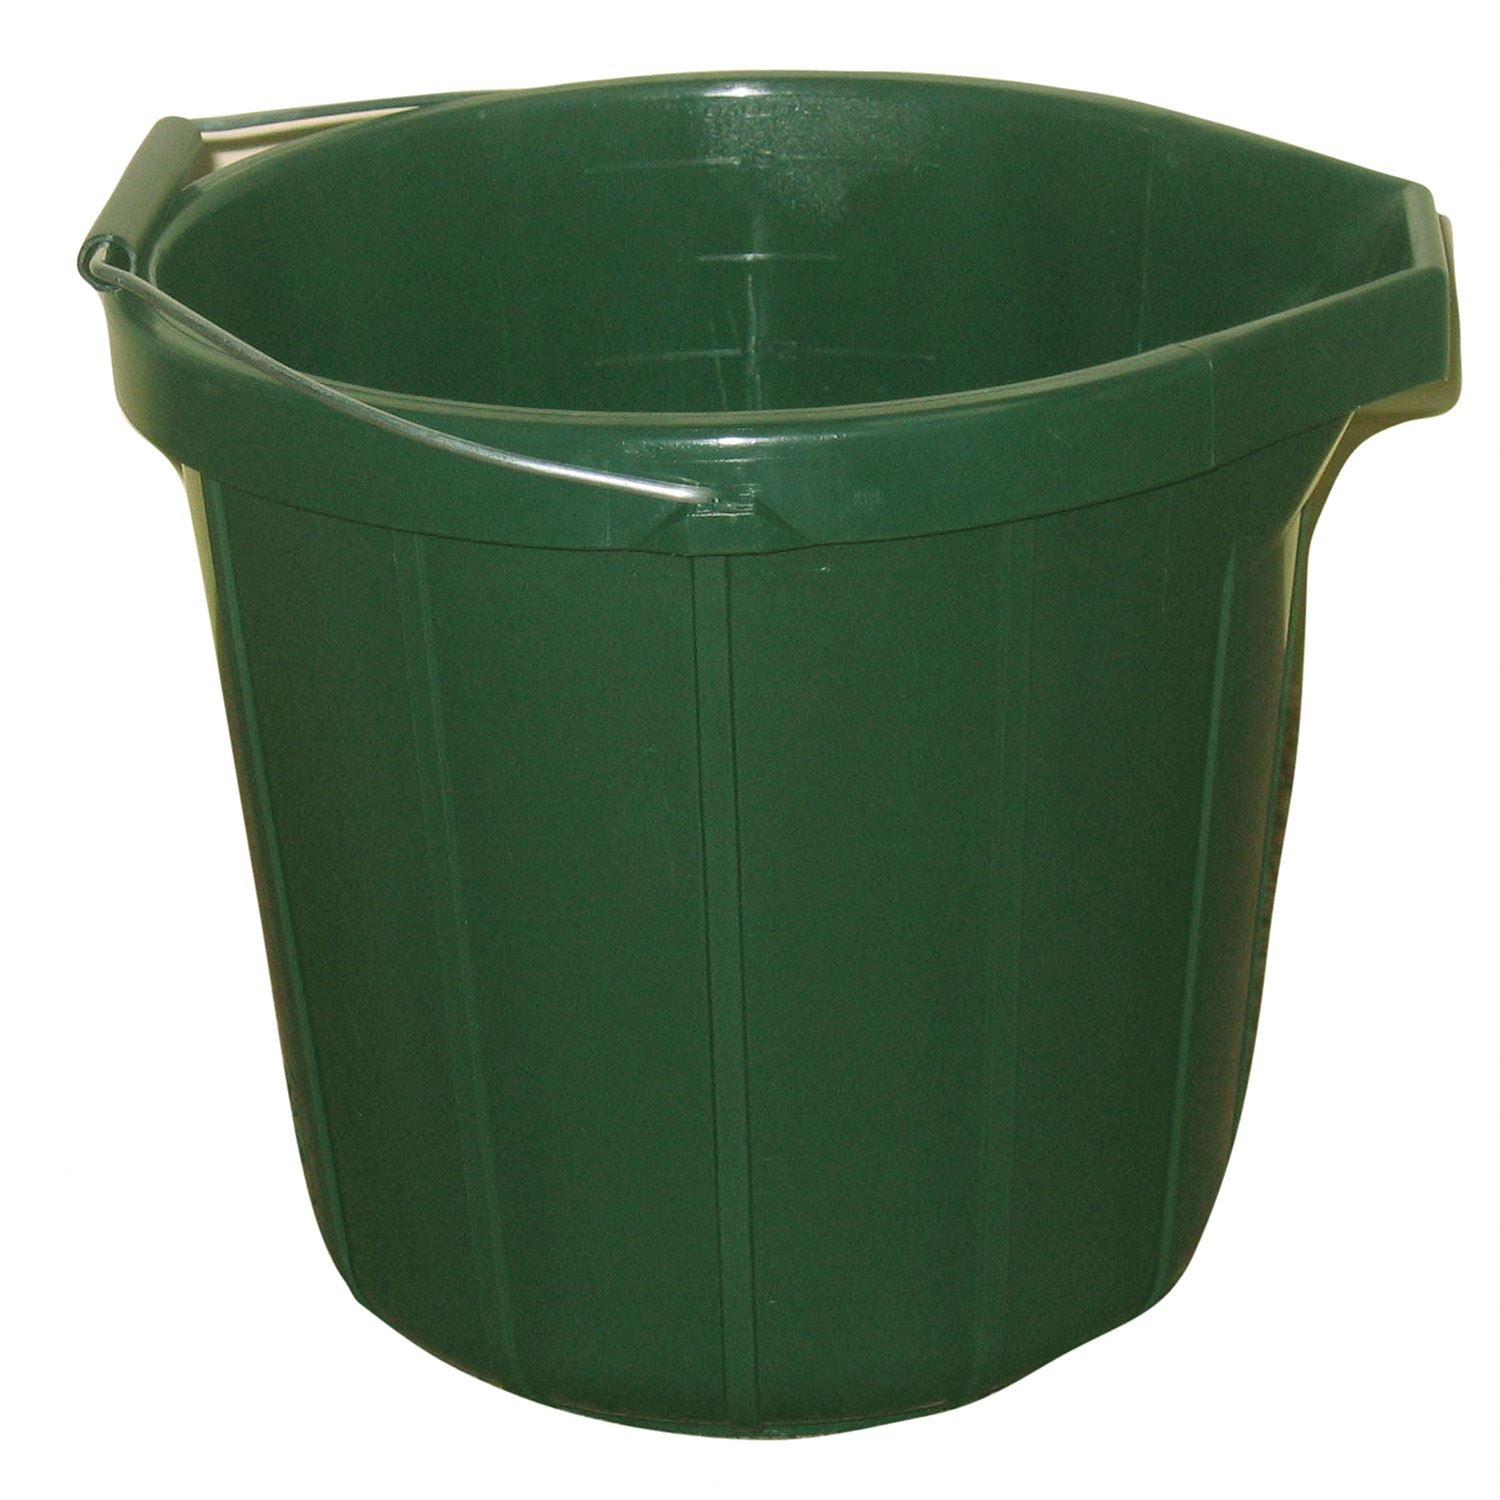 Trilanco Agricultural Bucket Green Bm10 - Just Horse Riders